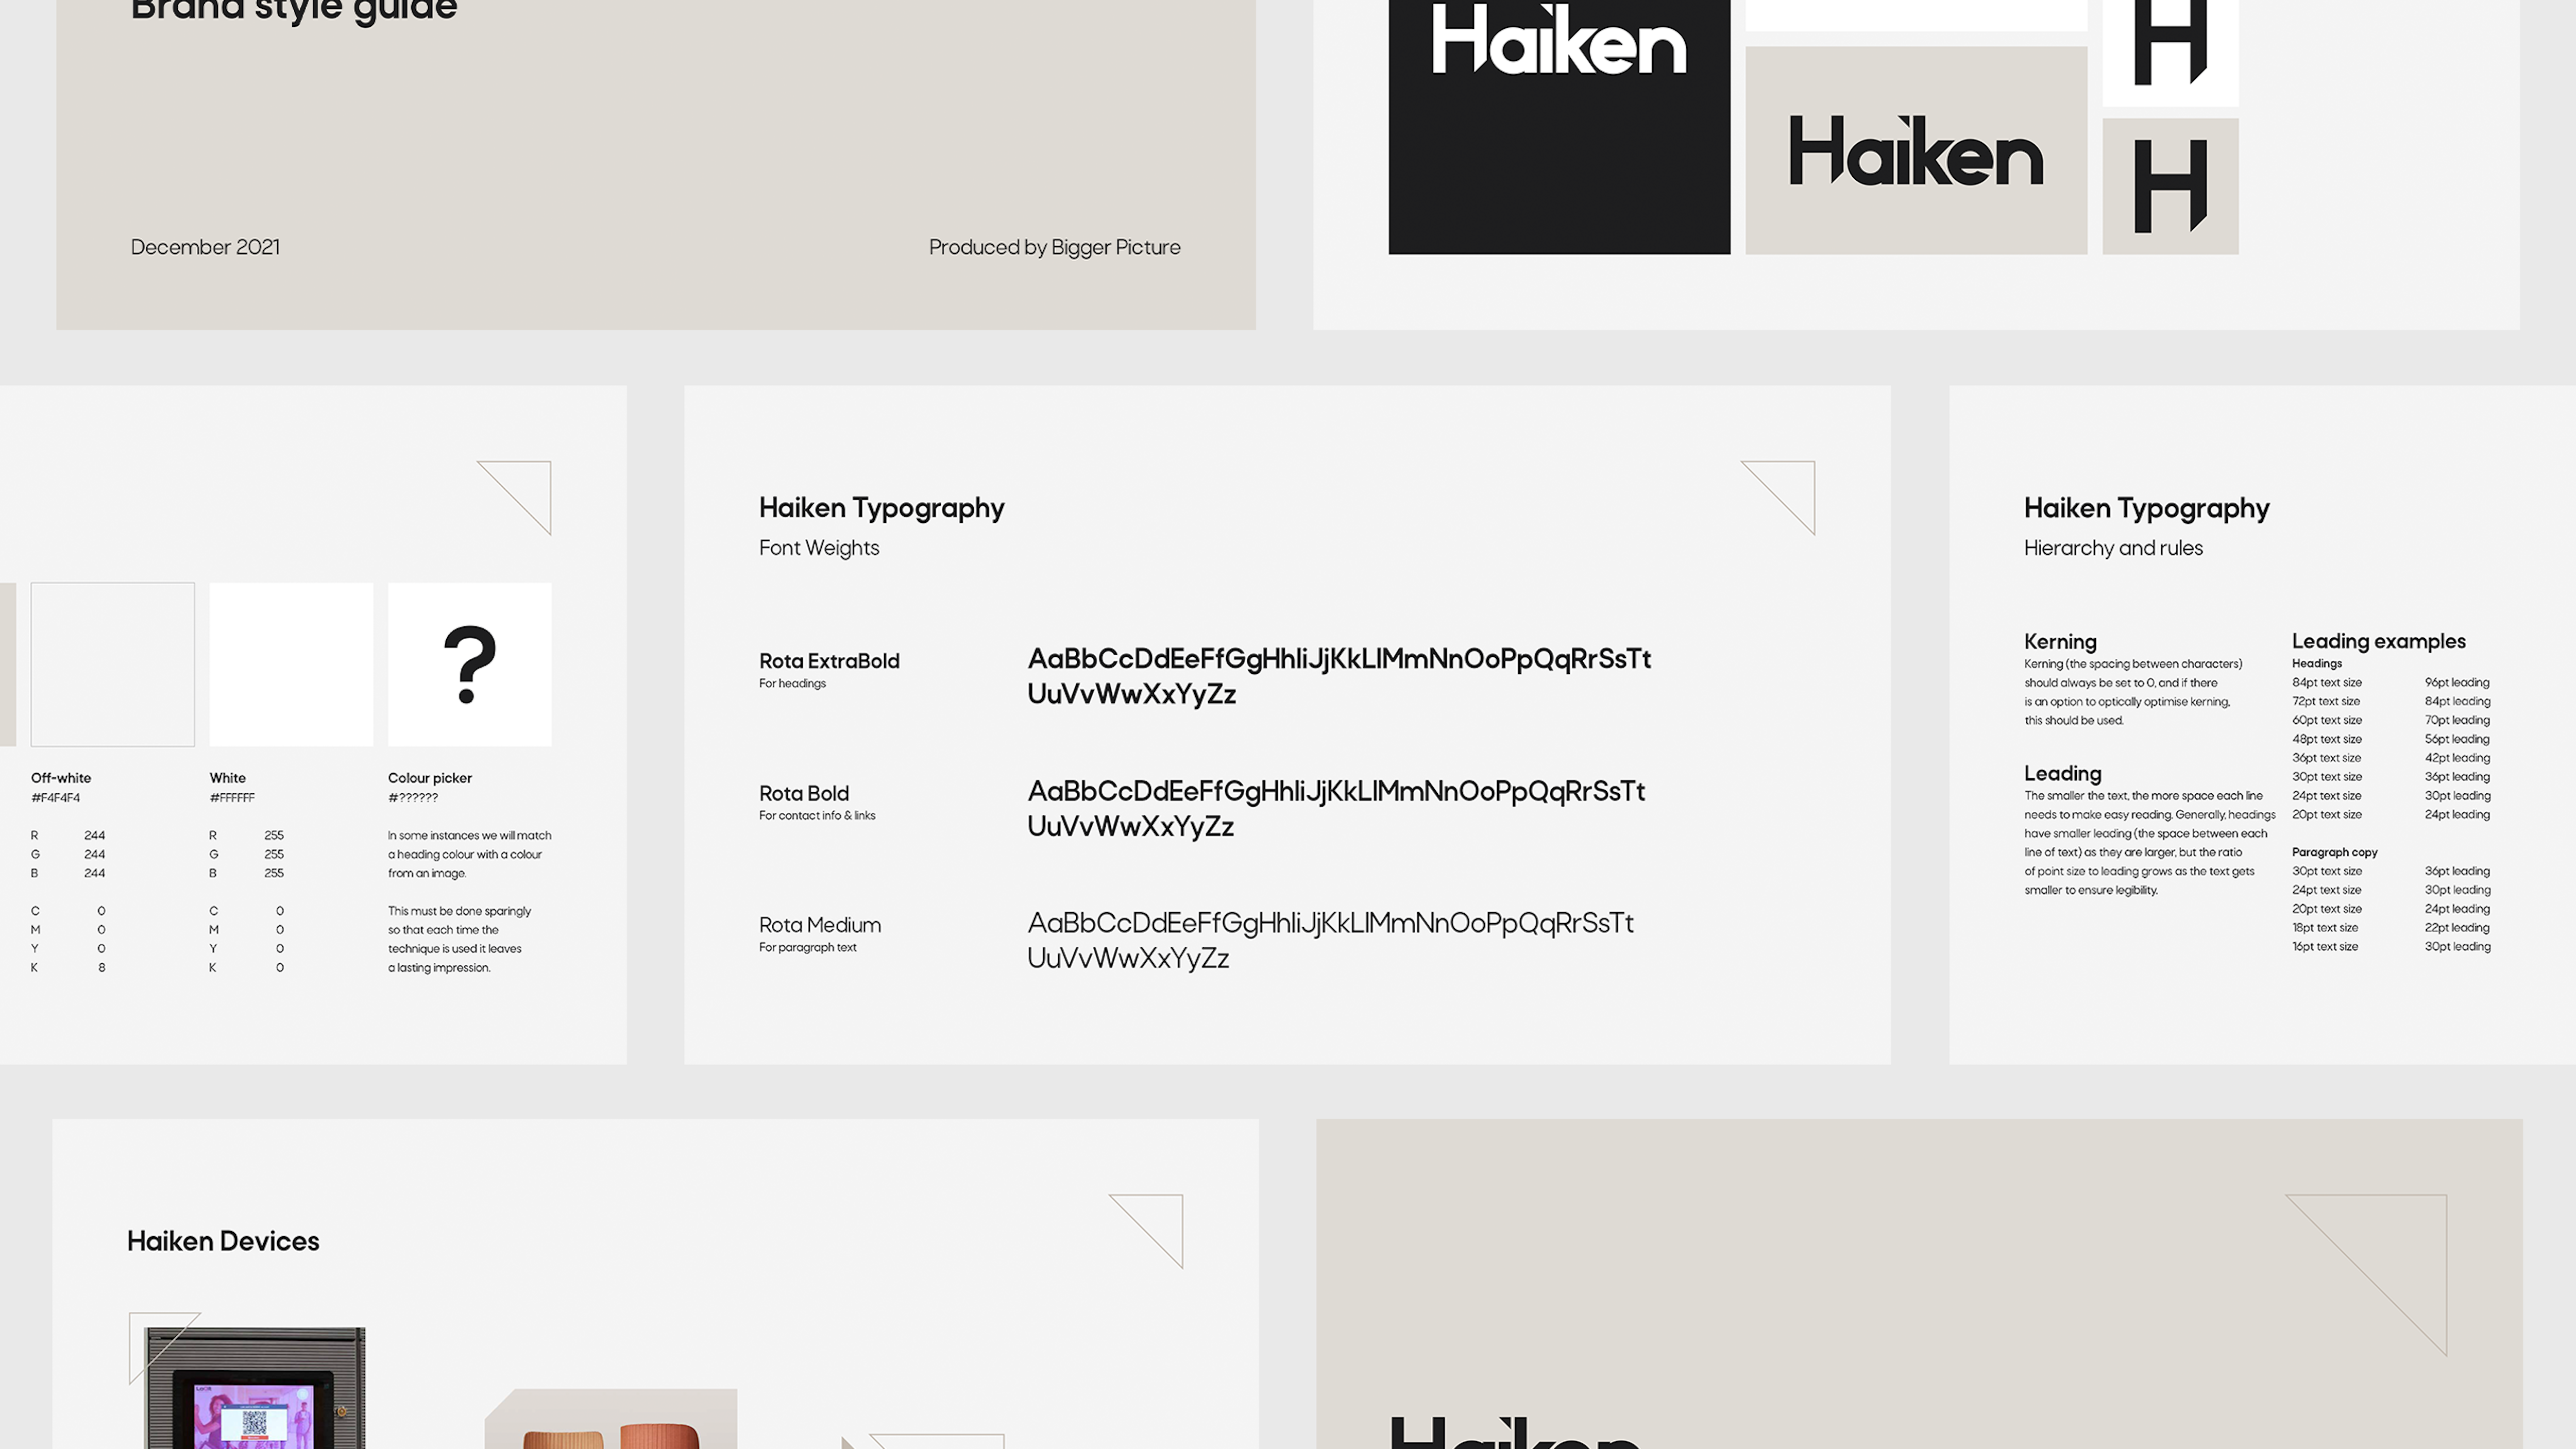 Haiken brand guide pages